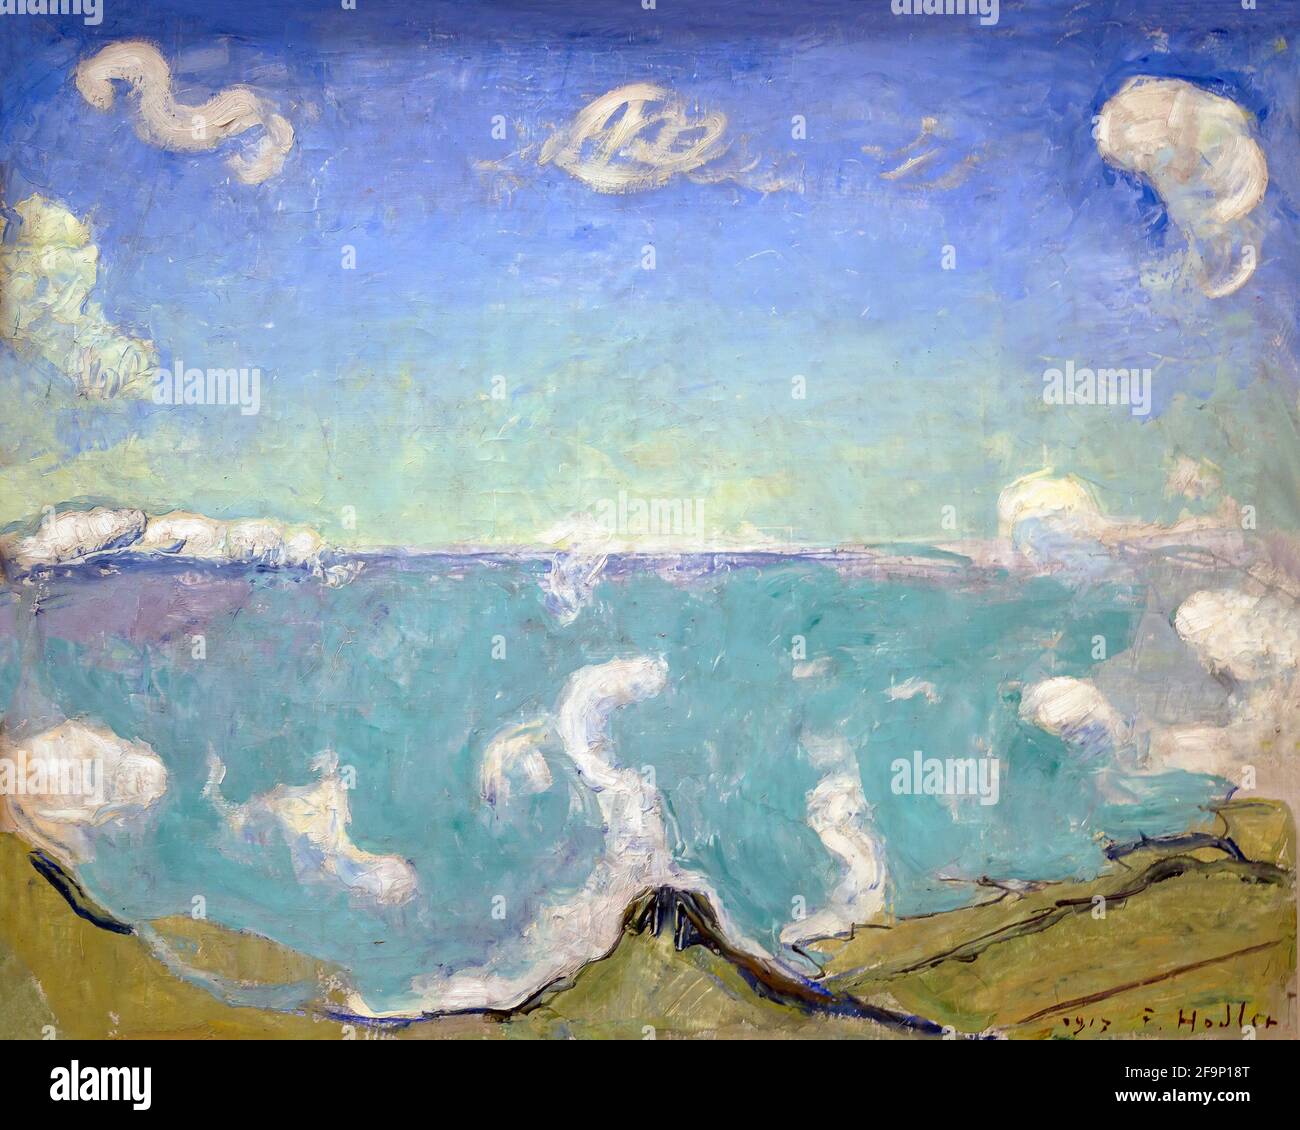 Landscape at Caux with Rising Clouds, Ferdinand Hodler, 1917, Stock Photo